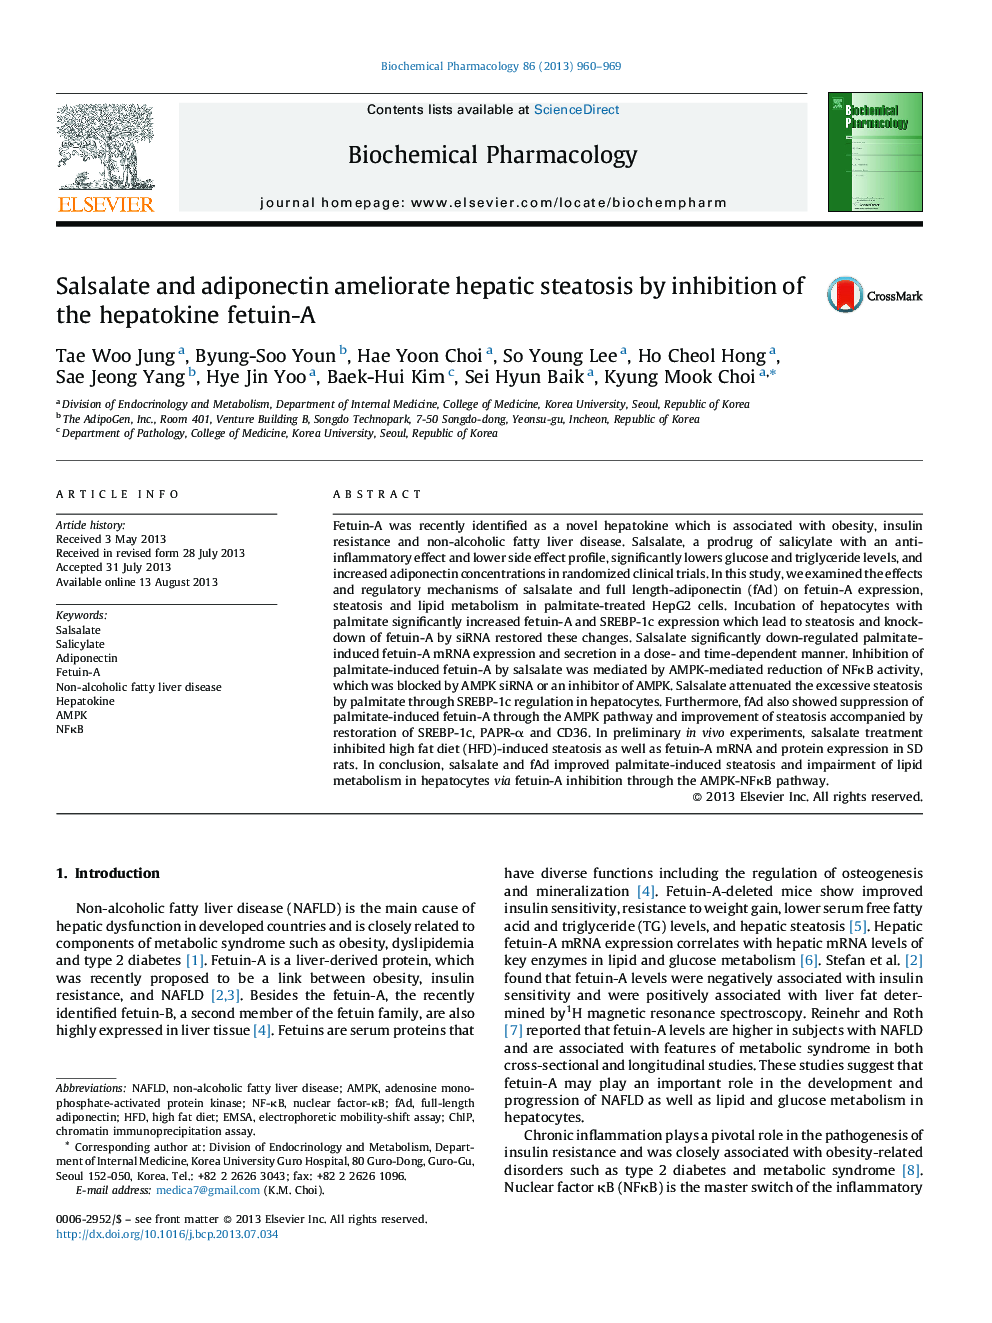 Salsalate and adiponectin ameliorate hepatic steatosis by inhibition of the hepatokine fetuin-A